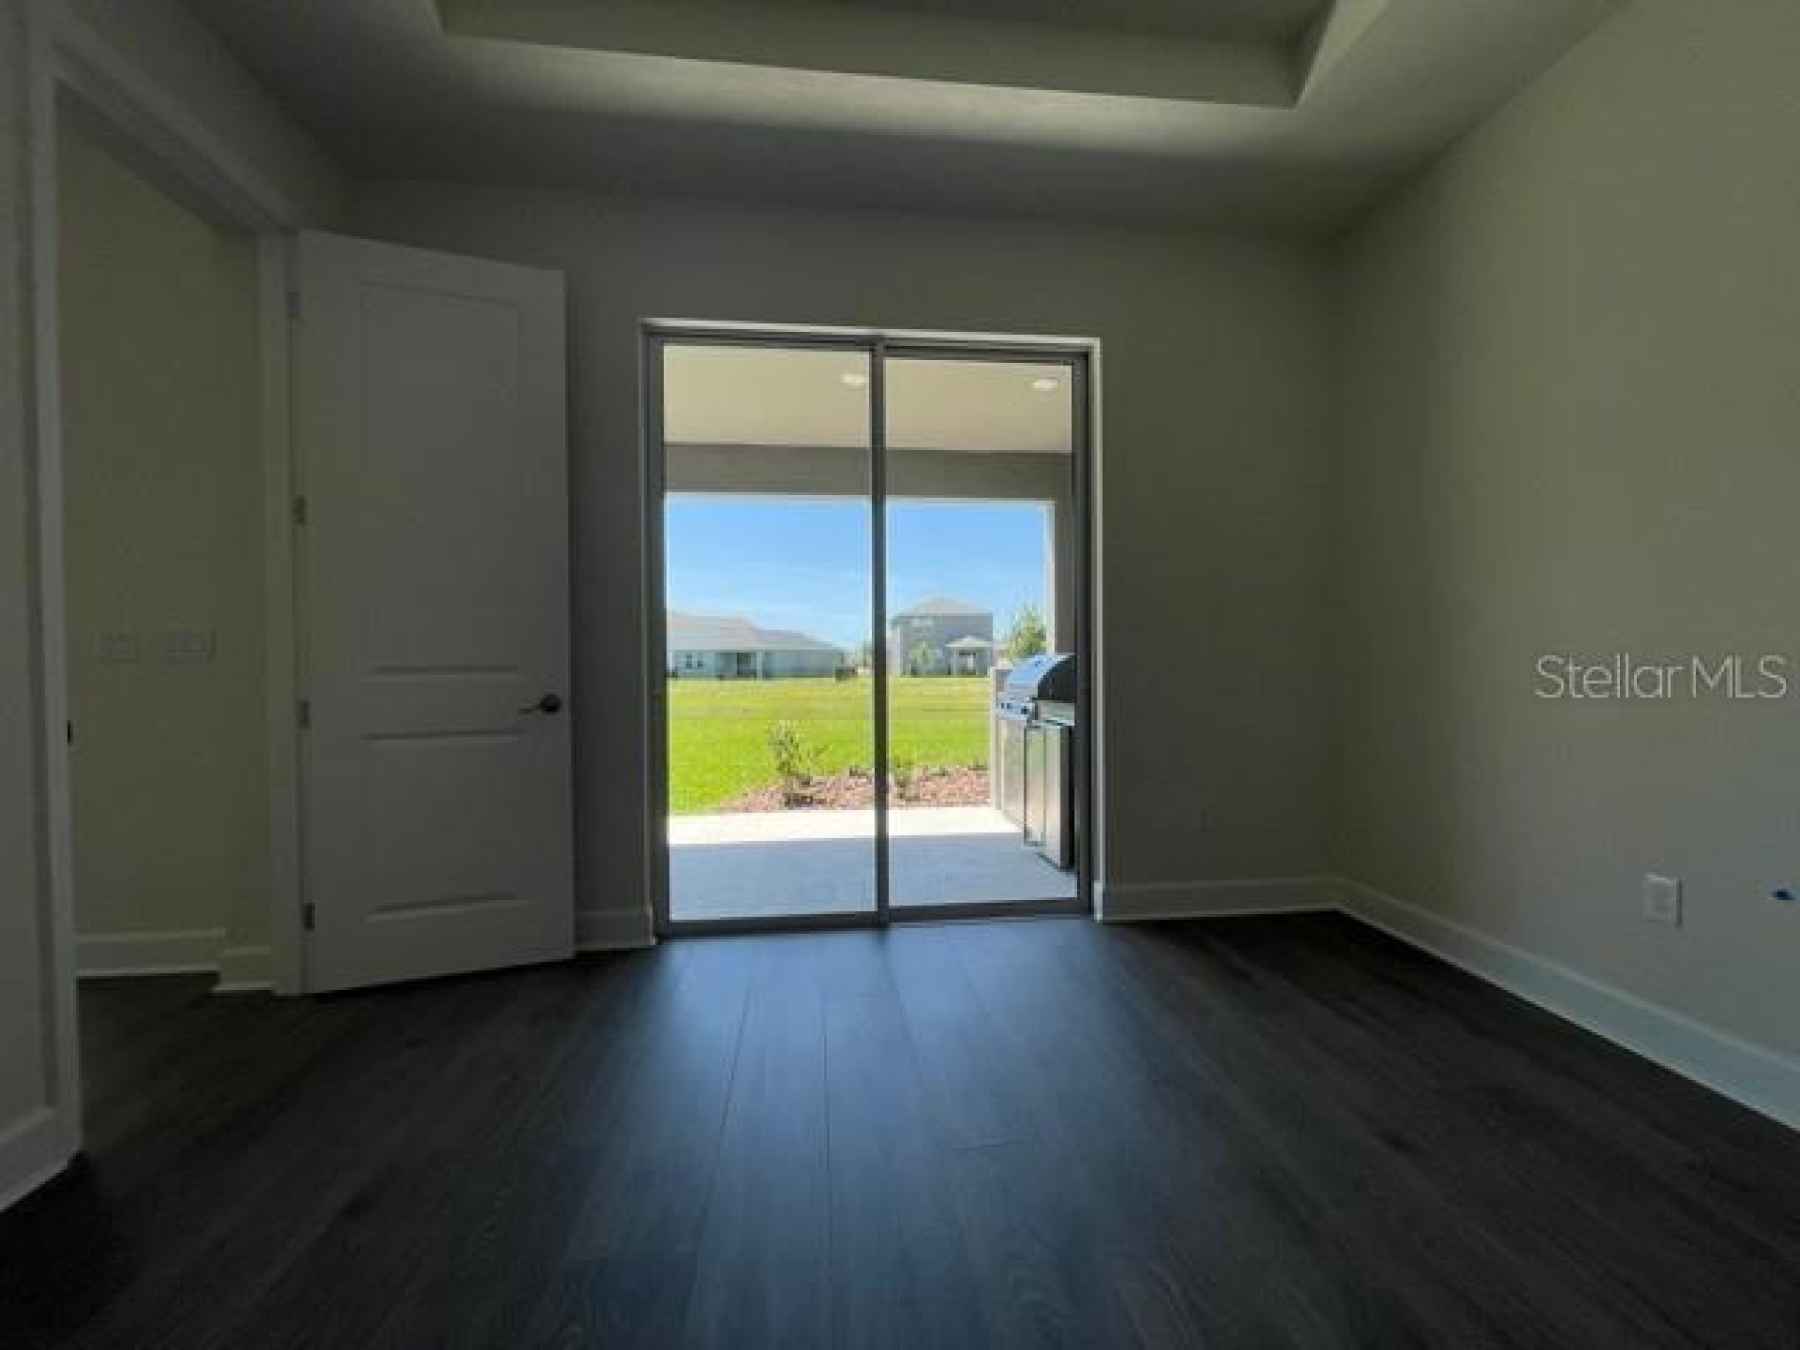 Spacious owner's retreat with gorgeous views outside!